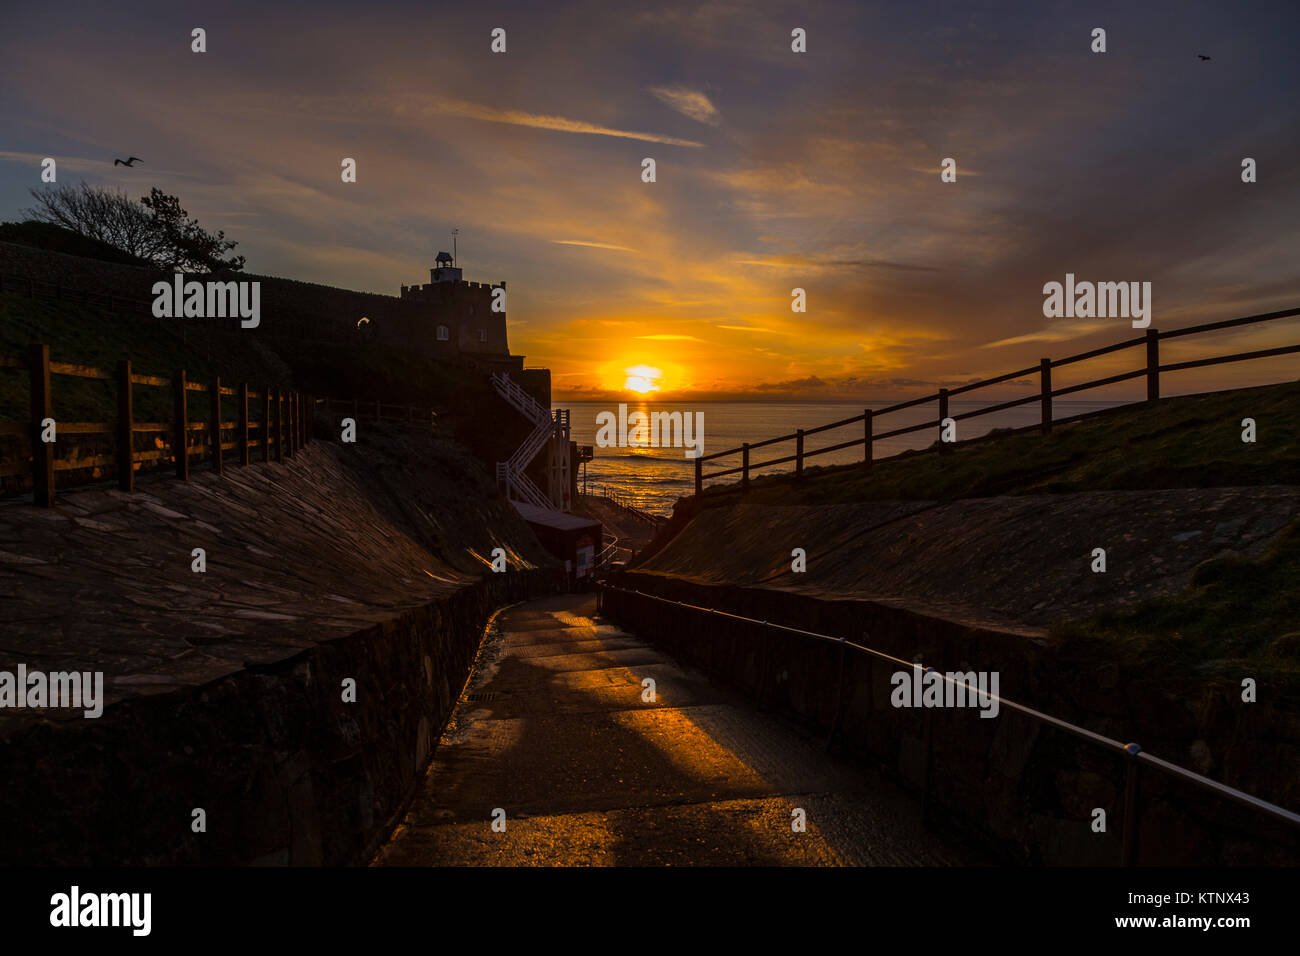 Sidmouth, Devon, 28th Dec 17 Dawn above Jacob's Ladder in  Sidmouth on a clear but freezing cold December morning. Photo Central / Alamy Live News Stock Photo